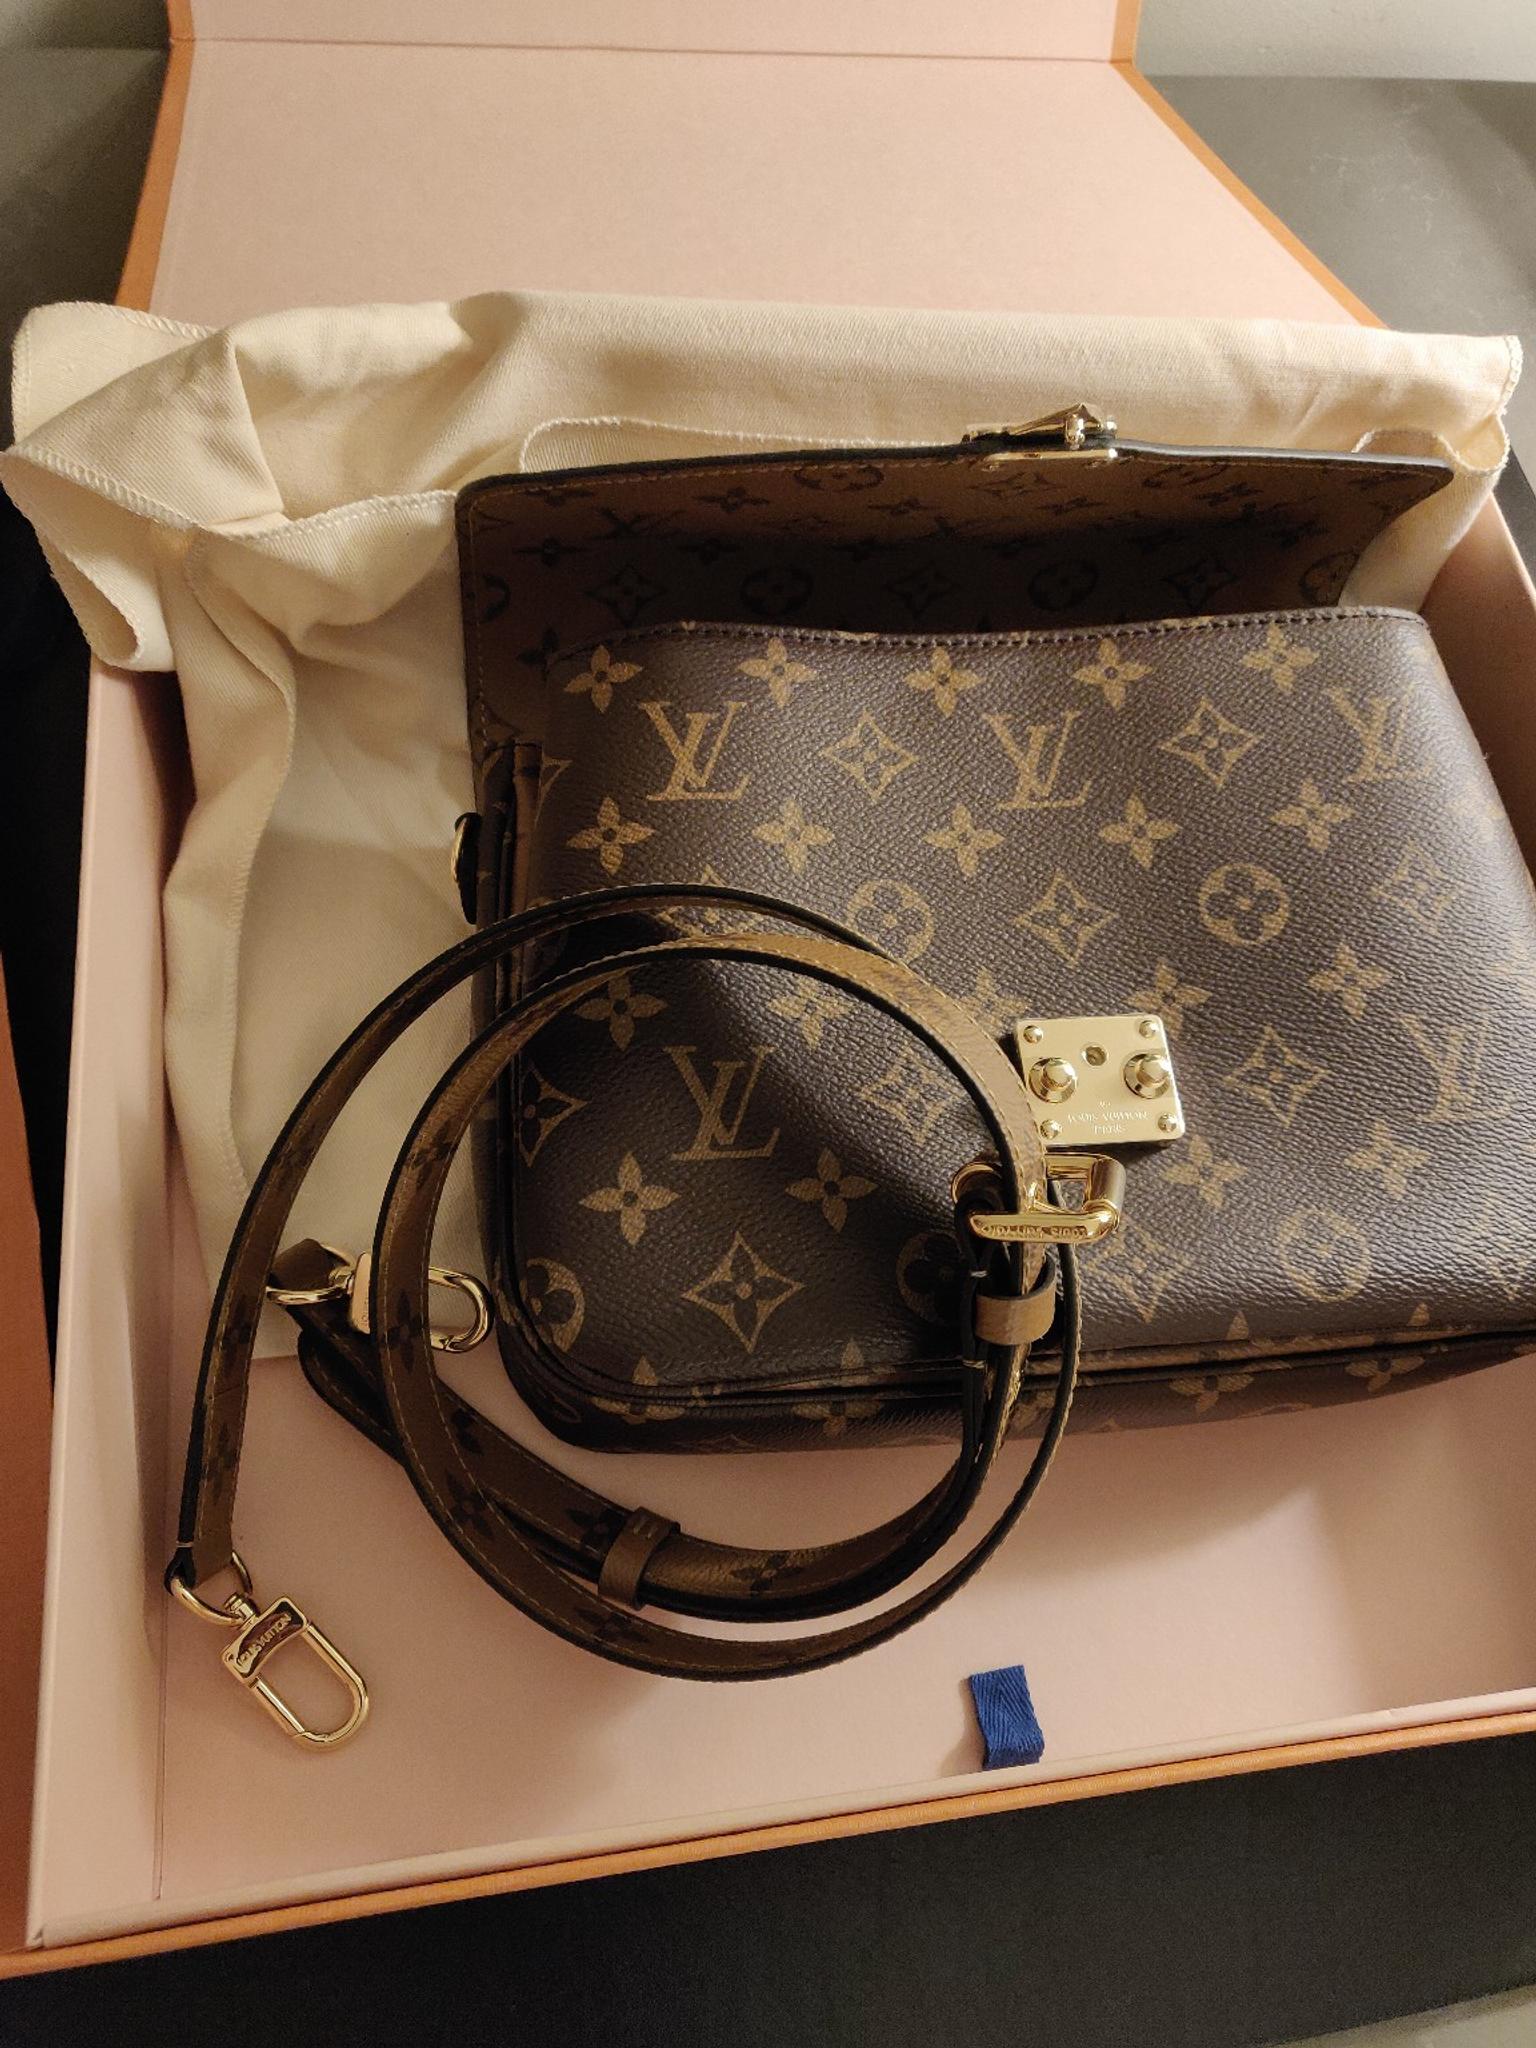 Brand New Louis Vuitton POCHETTE METIS in TW6 London for £1,600.00 for sale - Shpock